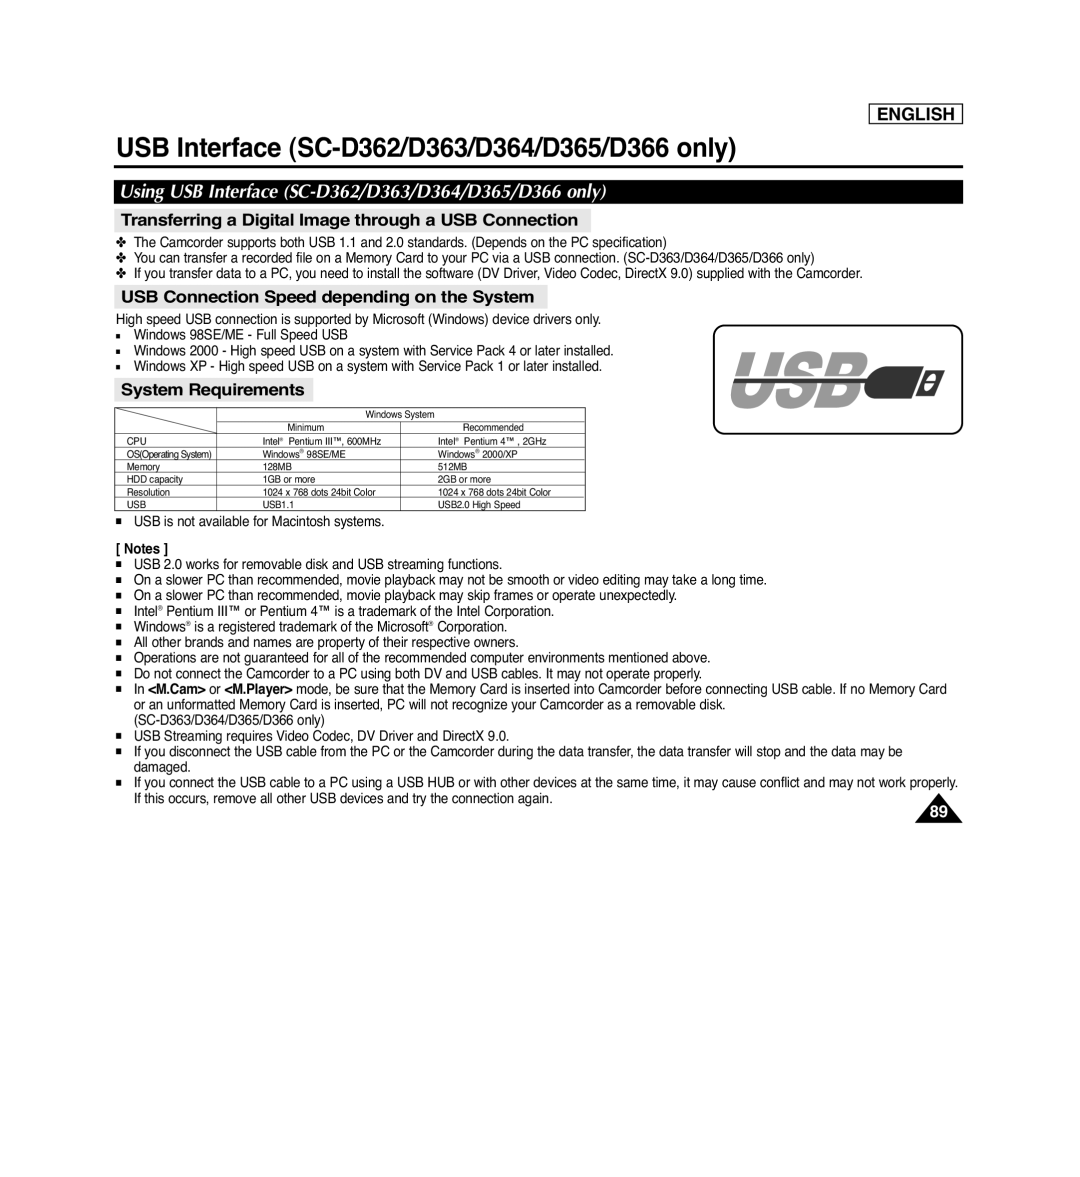 Samsung SC-D366 Using USB Interface SC-D362/D363/D364/D365/D366 only, USB Connection Speed depending on the System 